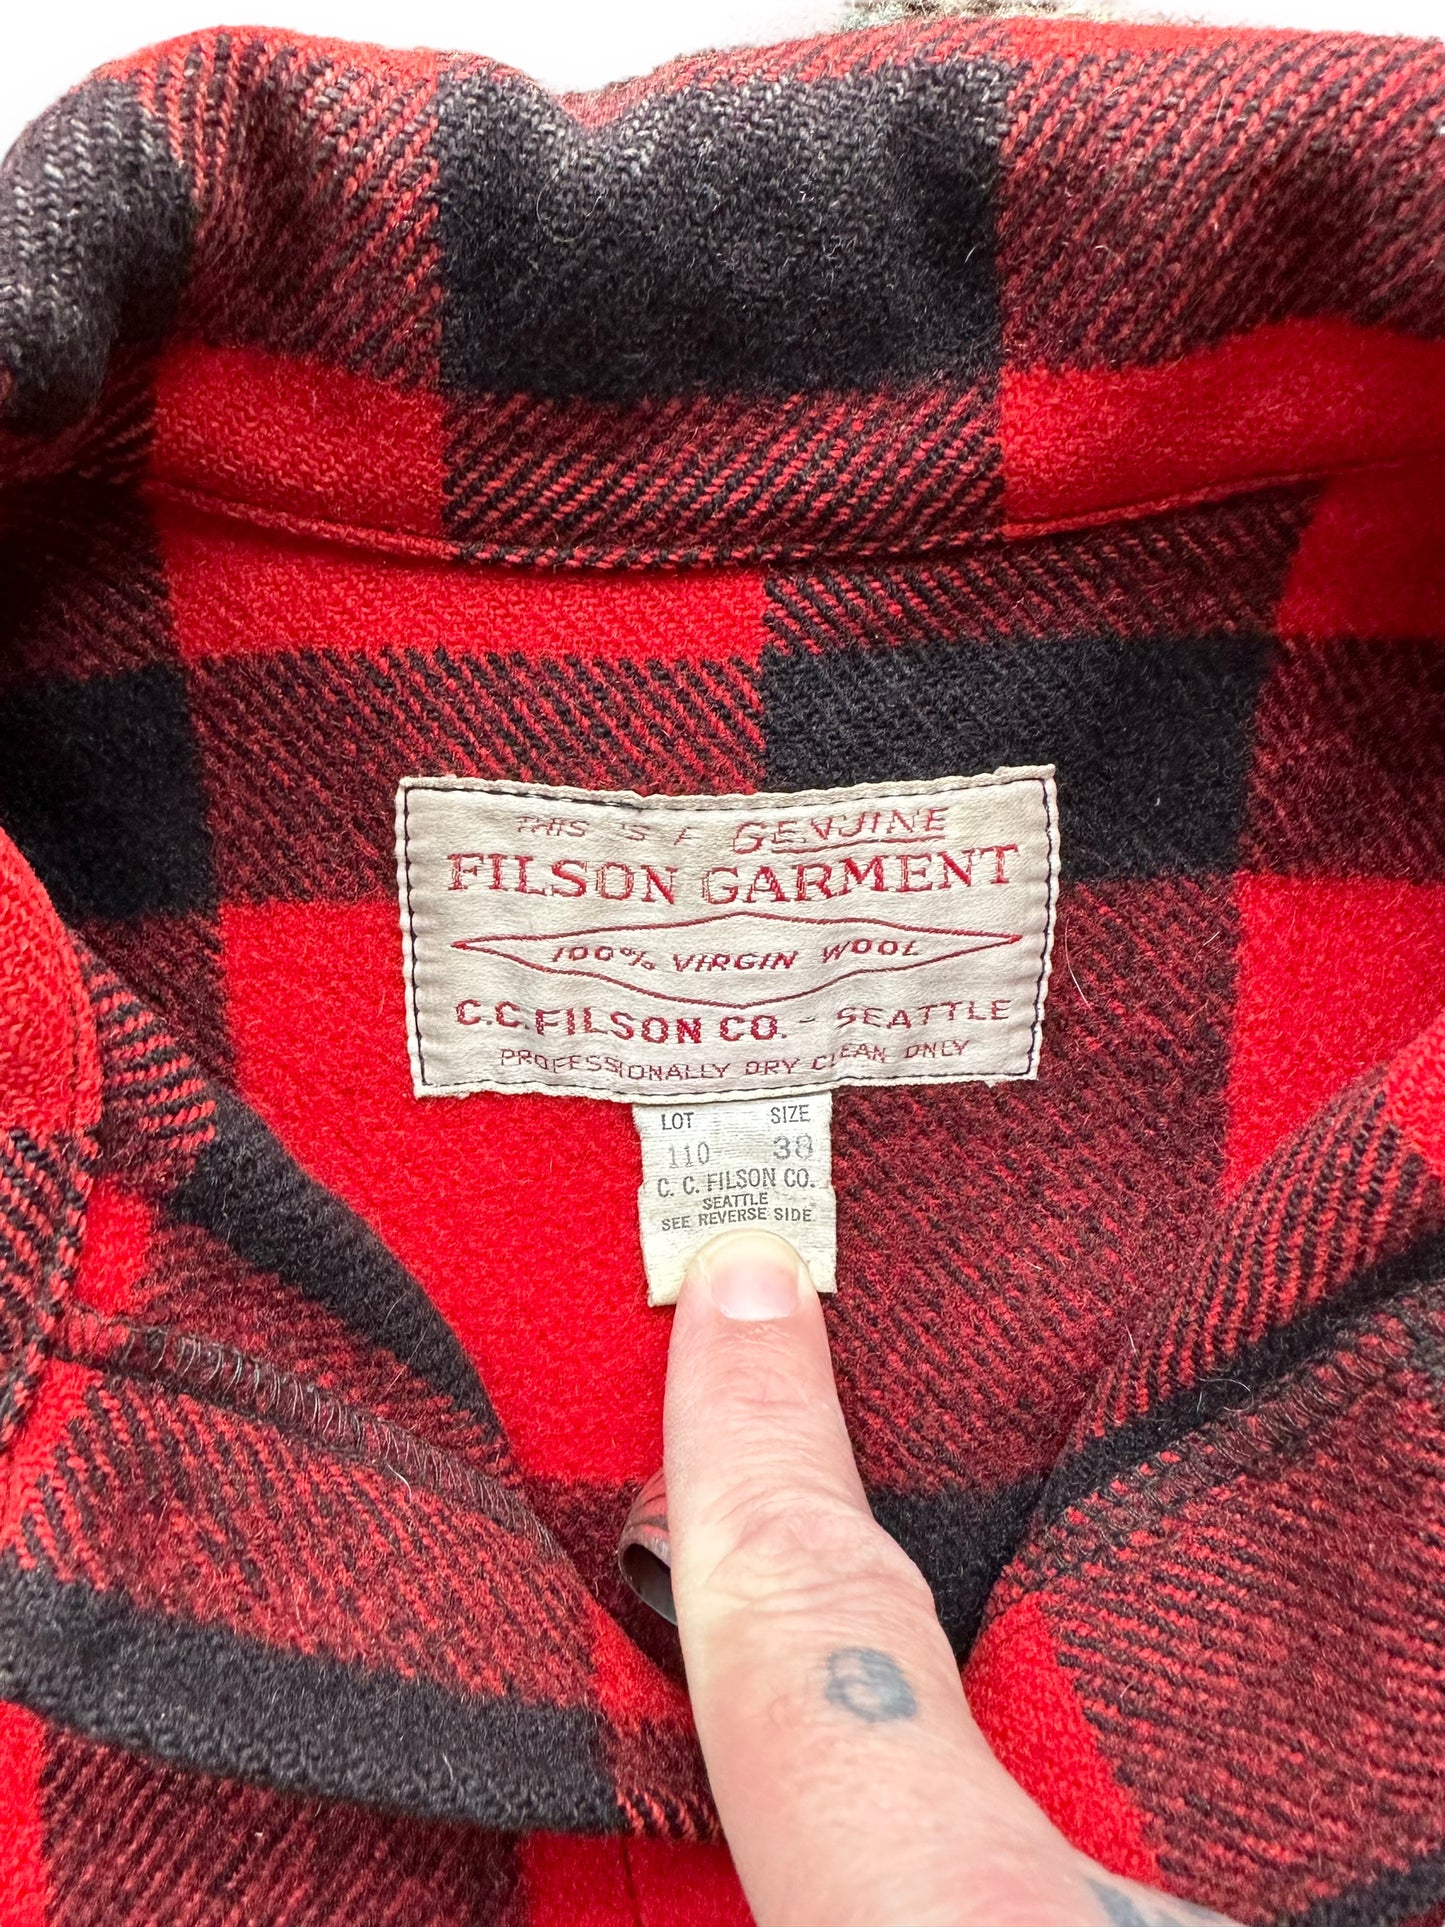 Tag View of Vintage Filson Red and Black Wool Cruiser Size 38 |  Barn Owl Vintage Goods | Vintage Filson Workwear Seattle